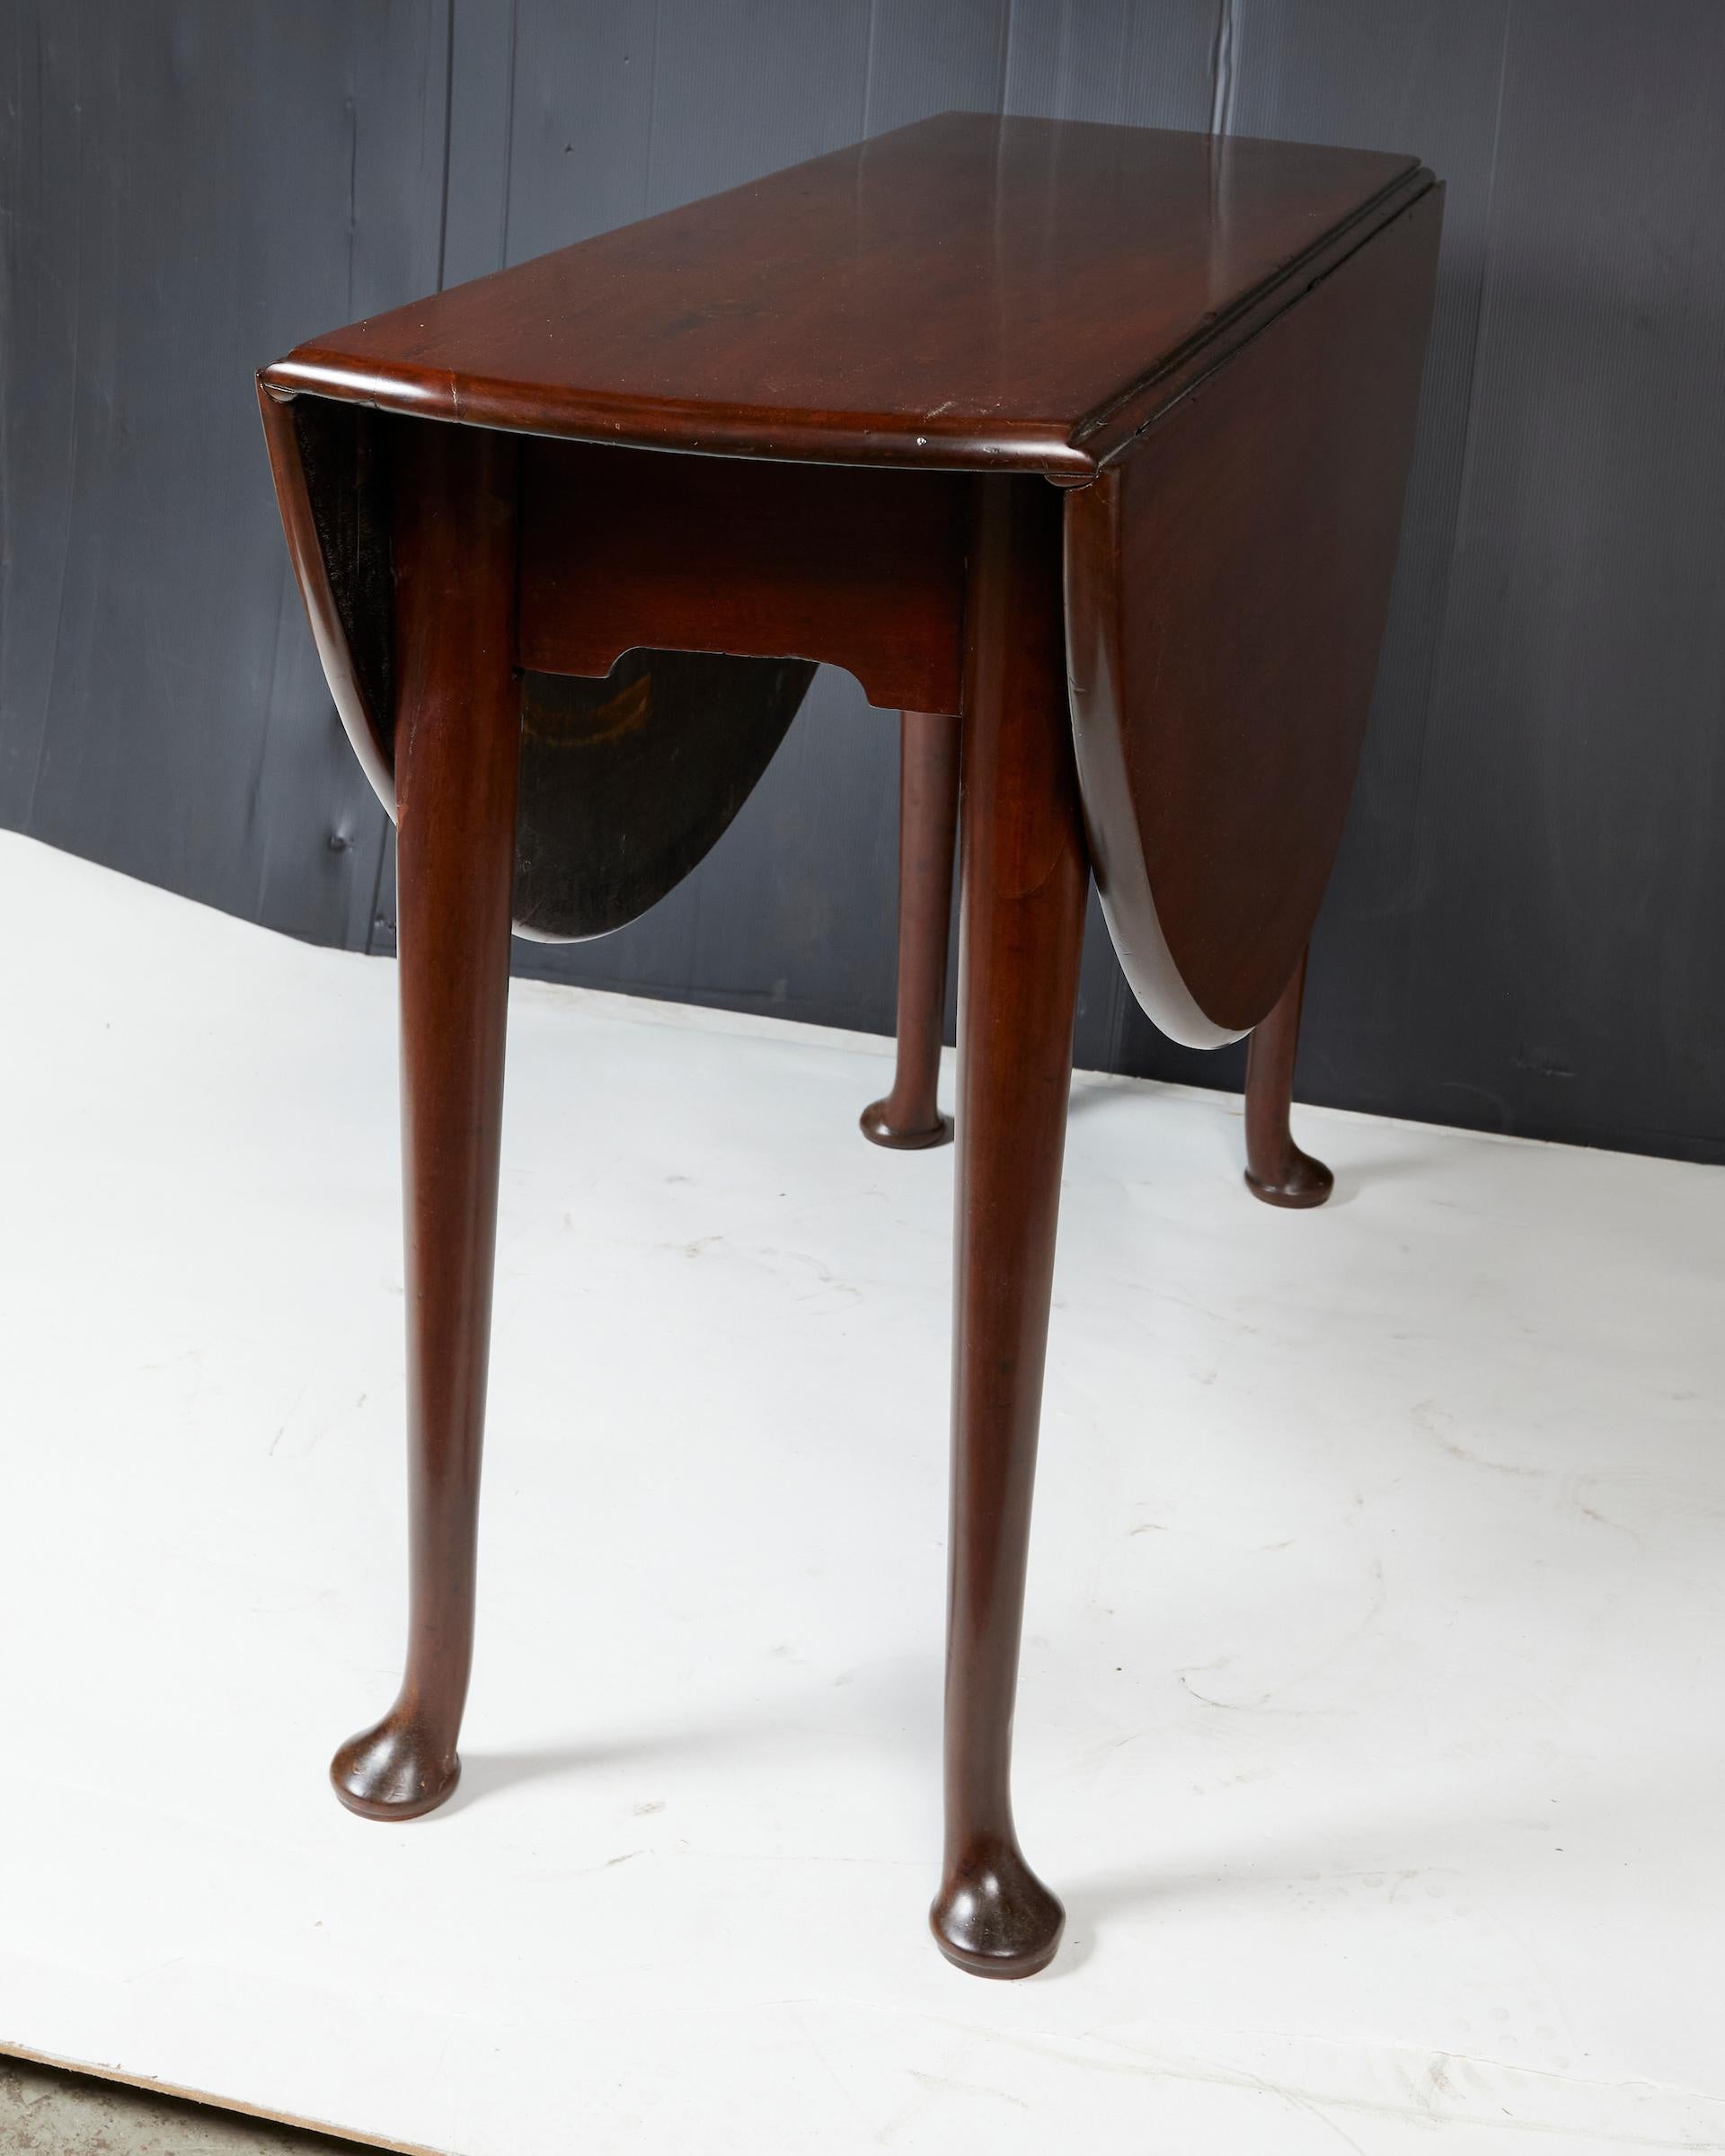 English Mahogany Queen Anne Drop Leaf Table